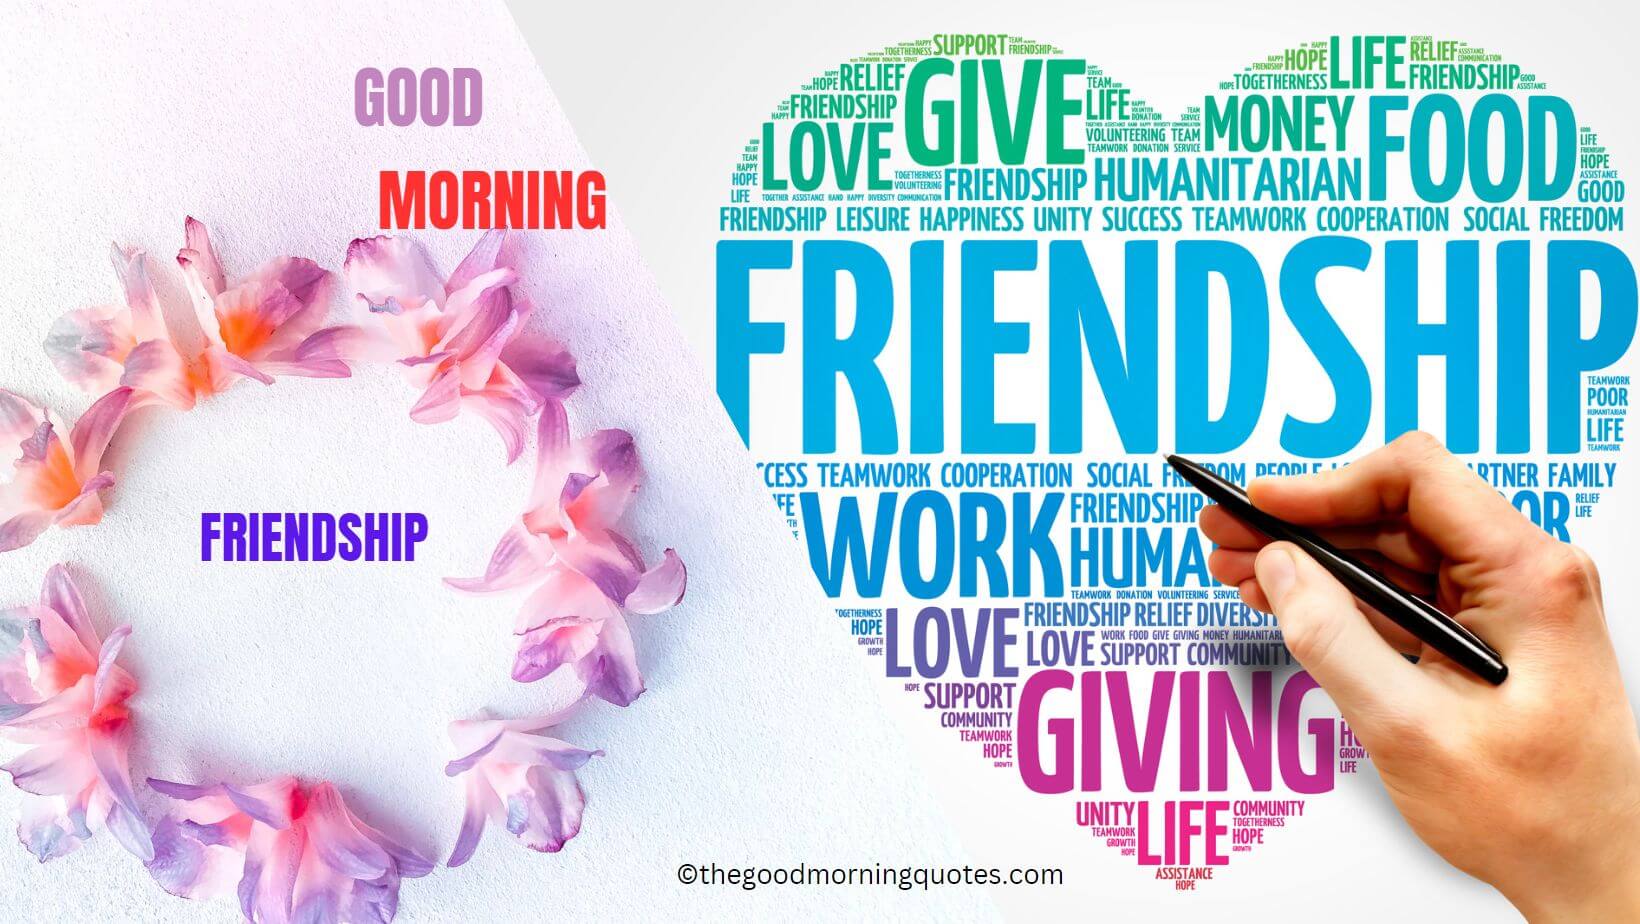 FRIENDSHIP GOOD MORNING QUOTES IN HINDI